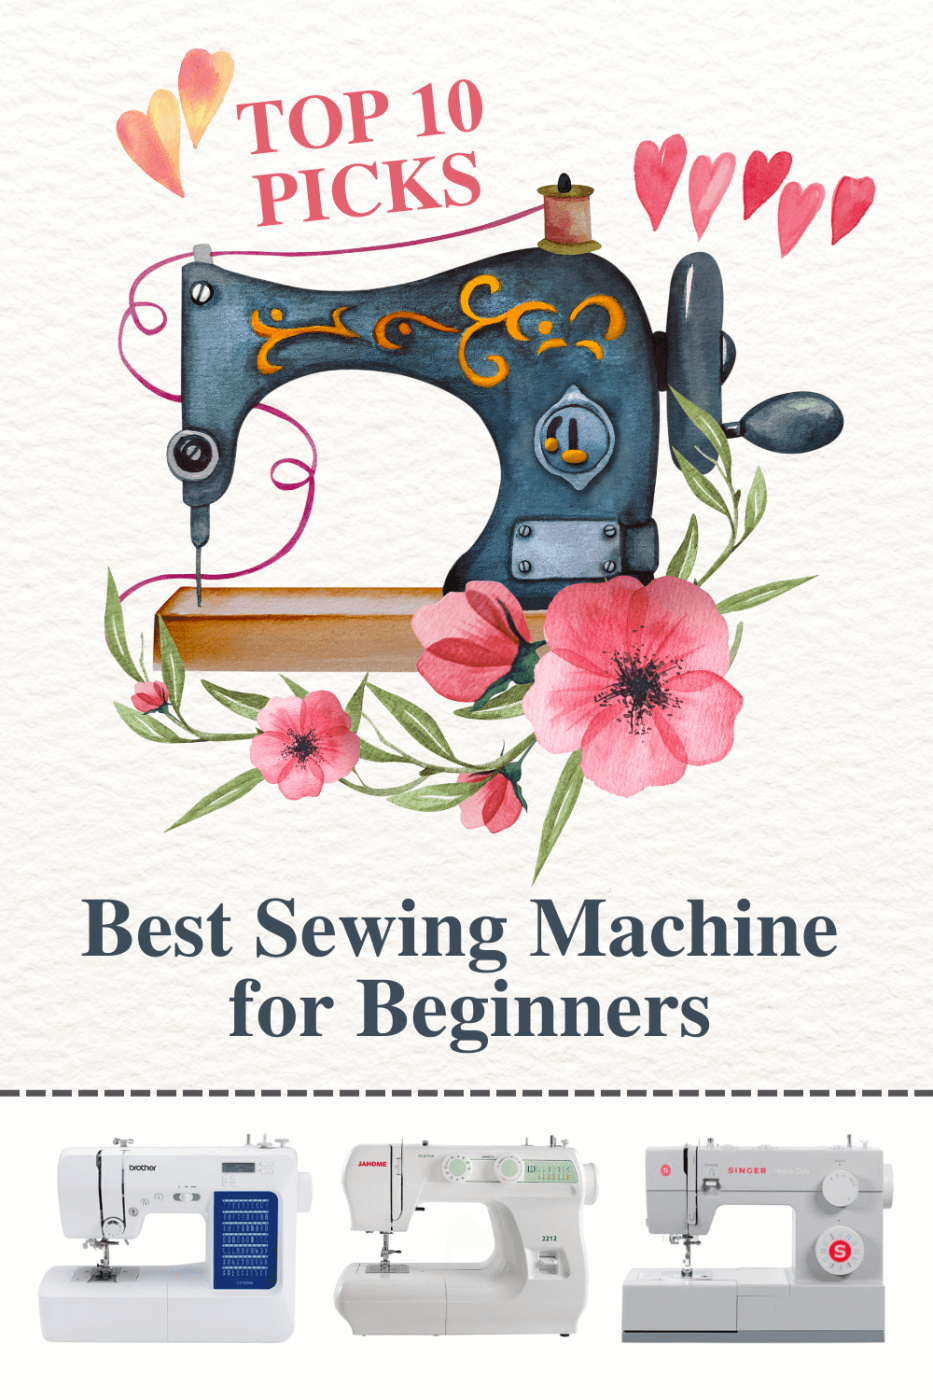 10 Best Sewing Machines for Beginners